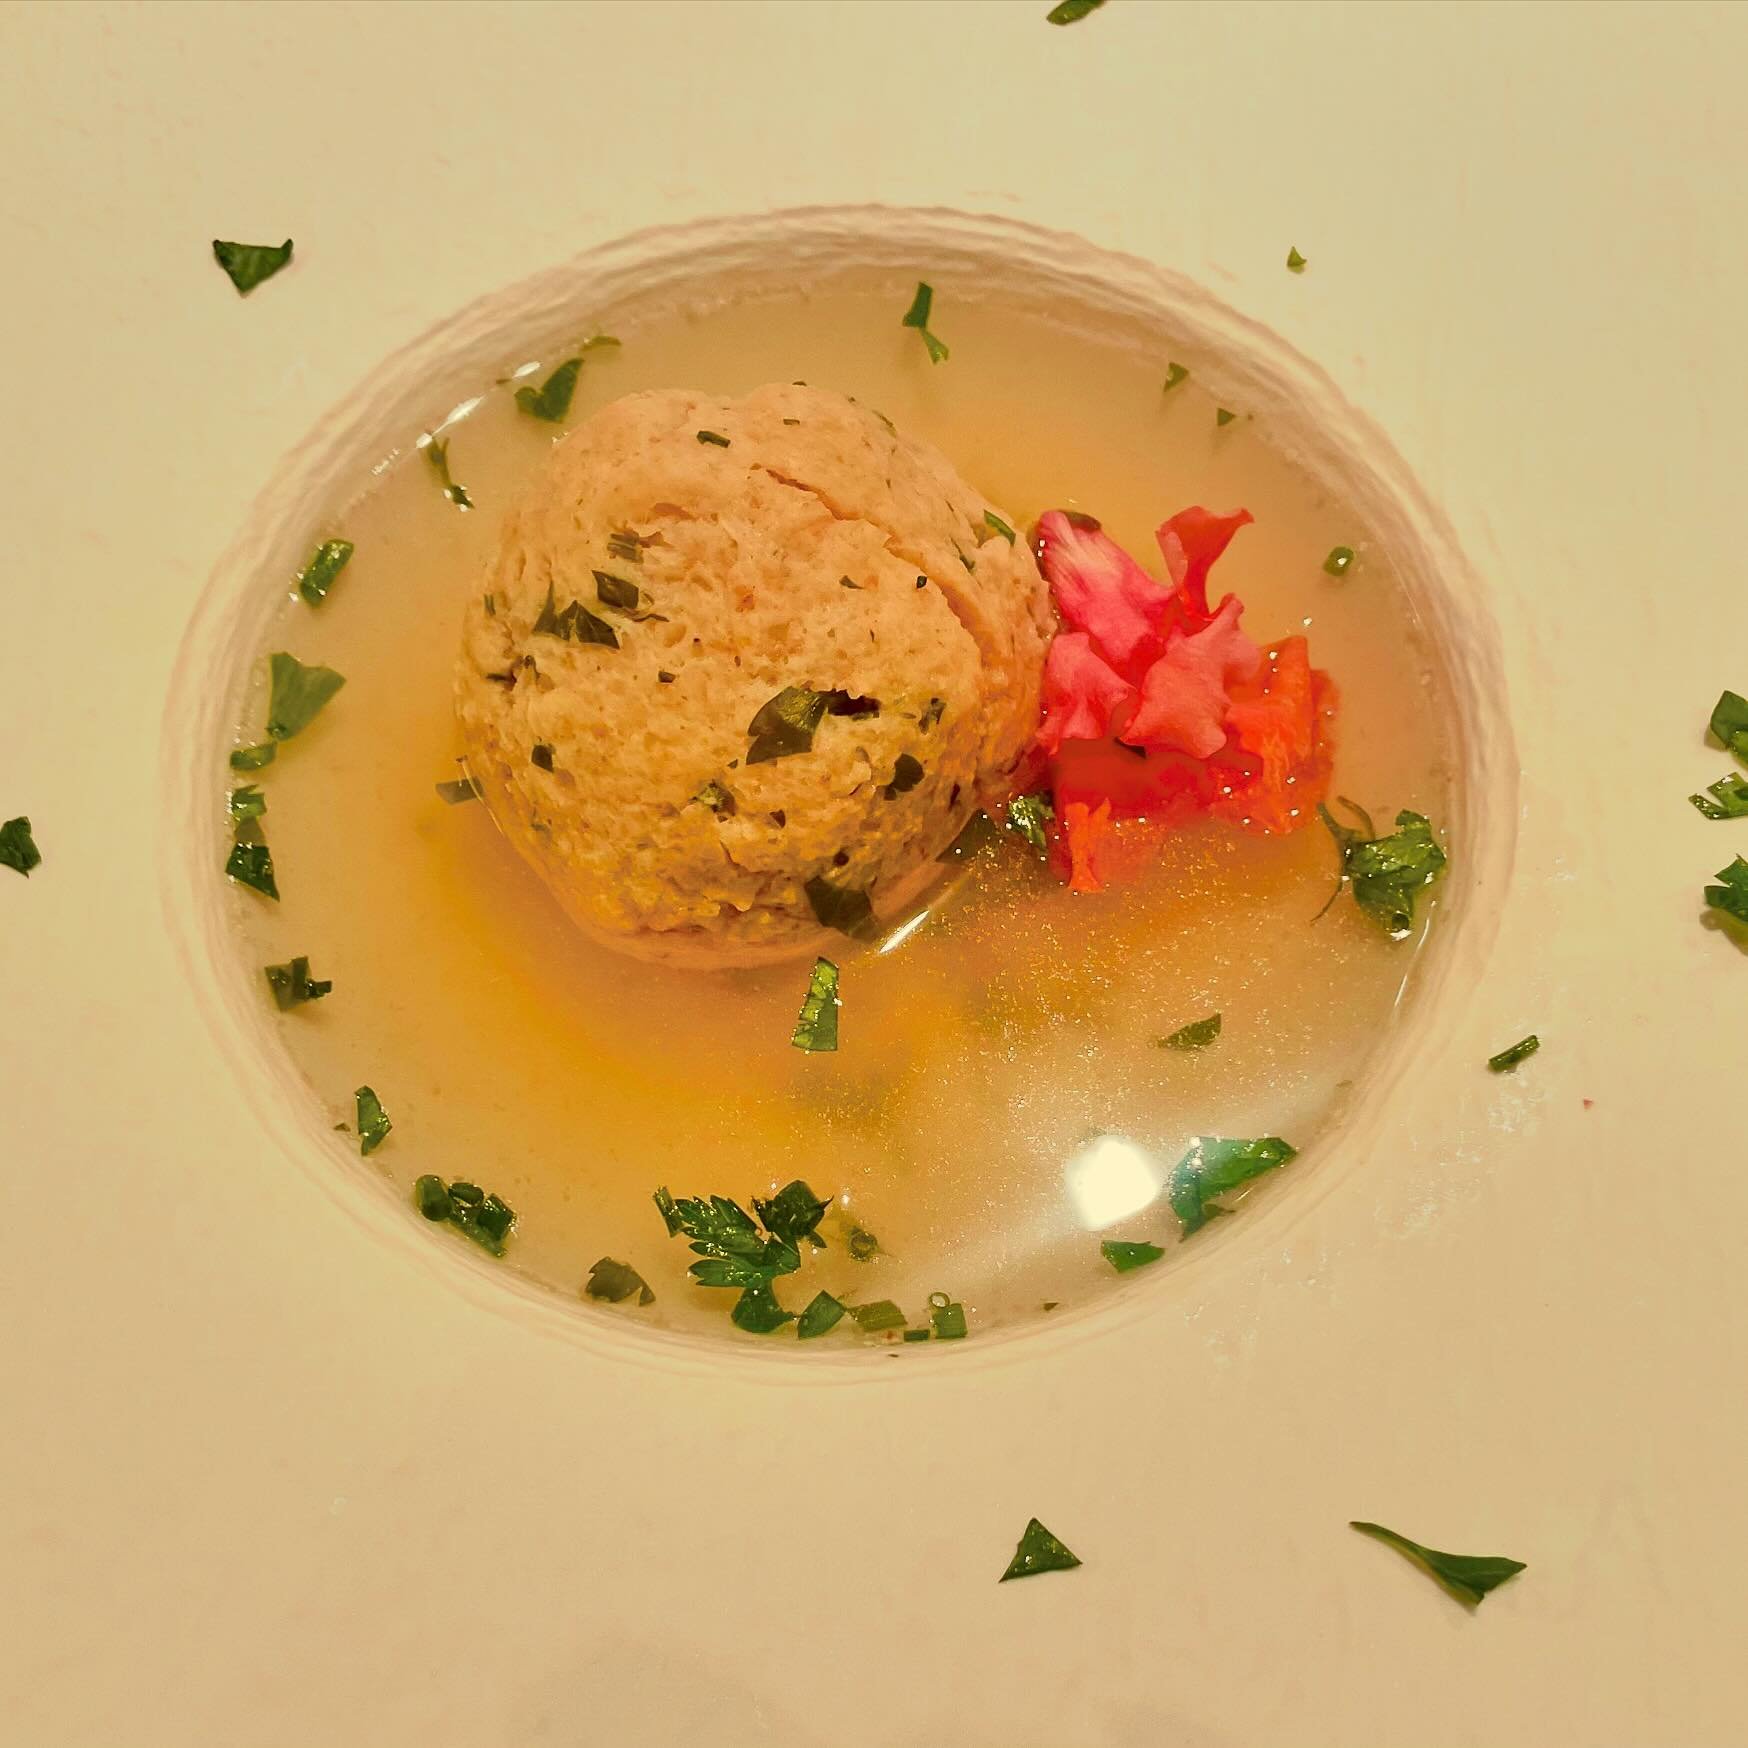 Matzo ball soup simplicity. #bluaubergine #fabulousfood #catering #passover #kosherforpassover #homemade #privatechef #nycpassover #nyccatering